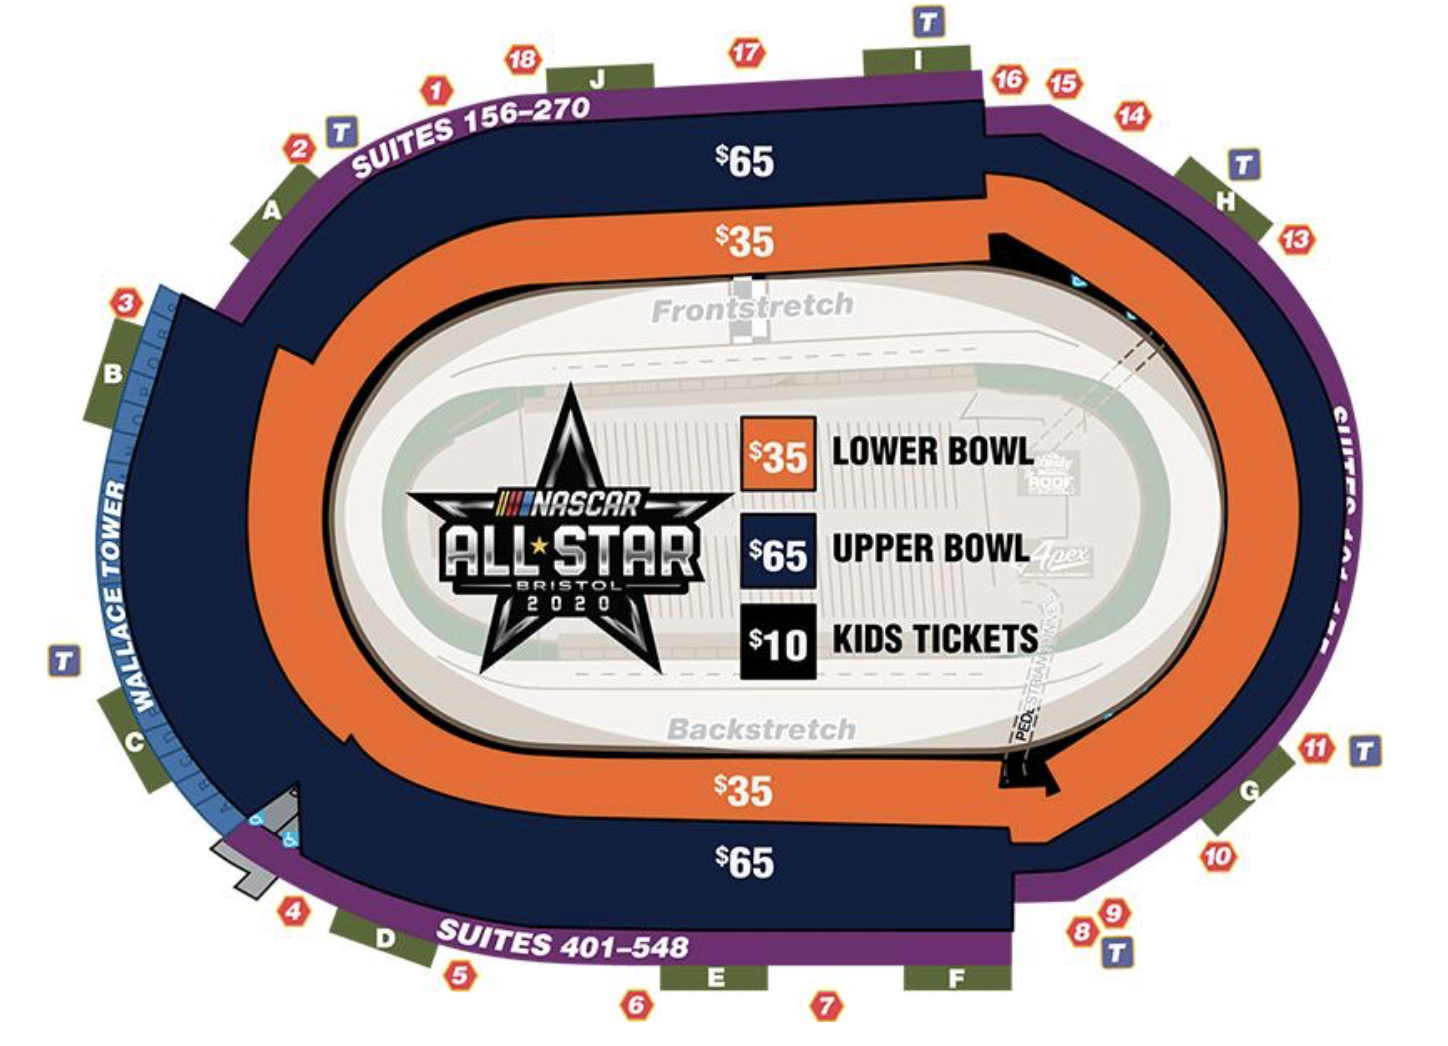 How To Find Cheapest 2020 NASCAR AllStar Race Tickets + Face Value Options